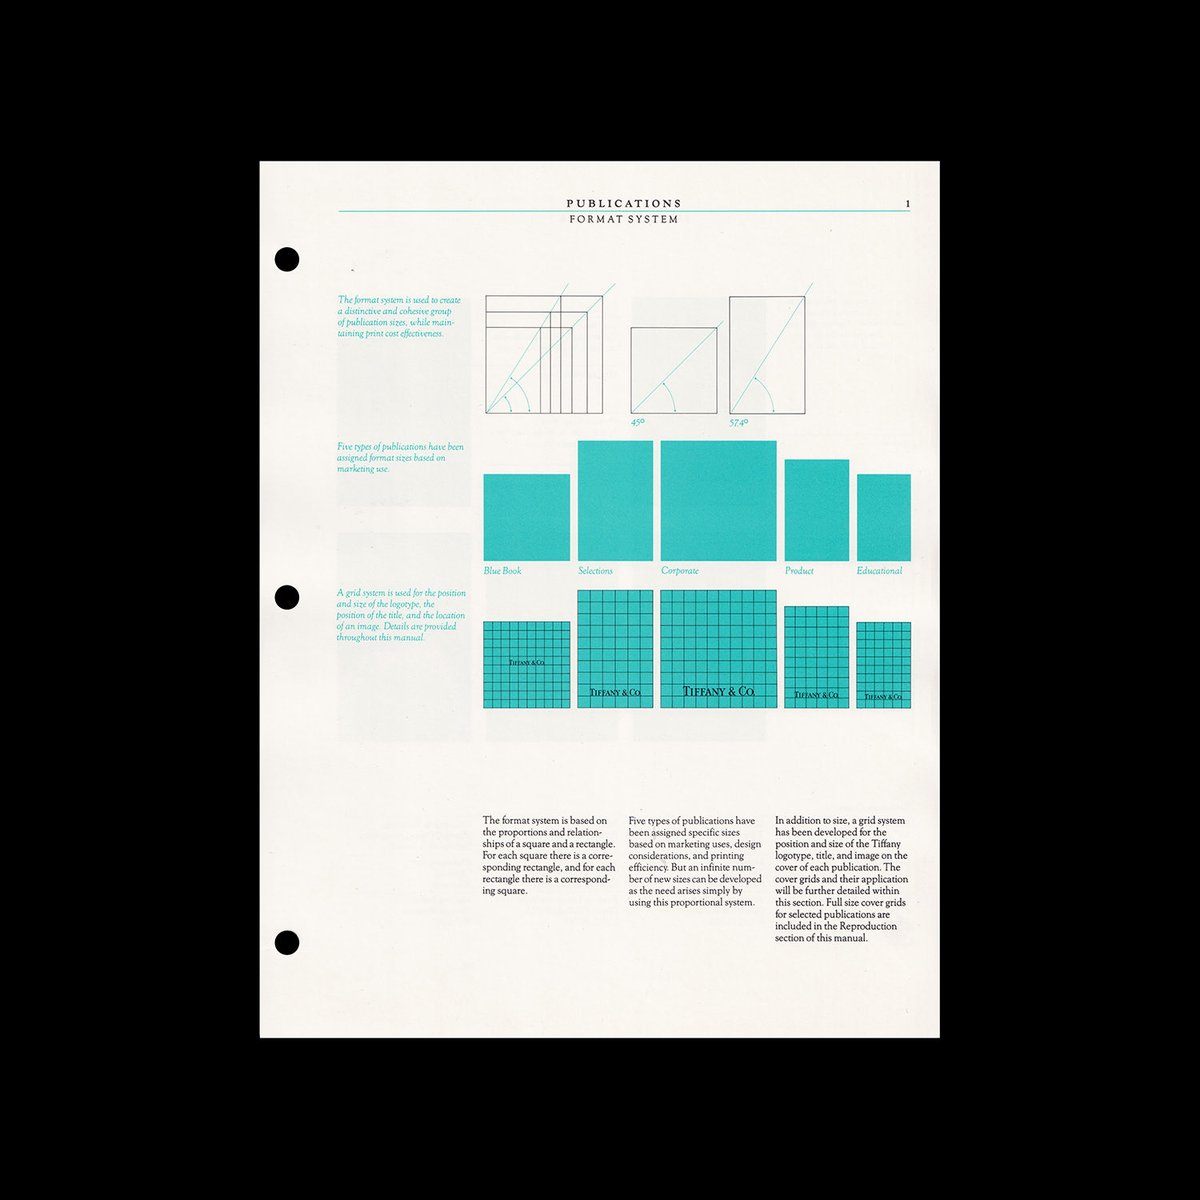 Pages from the 1987 Tiffany brand guidelines.